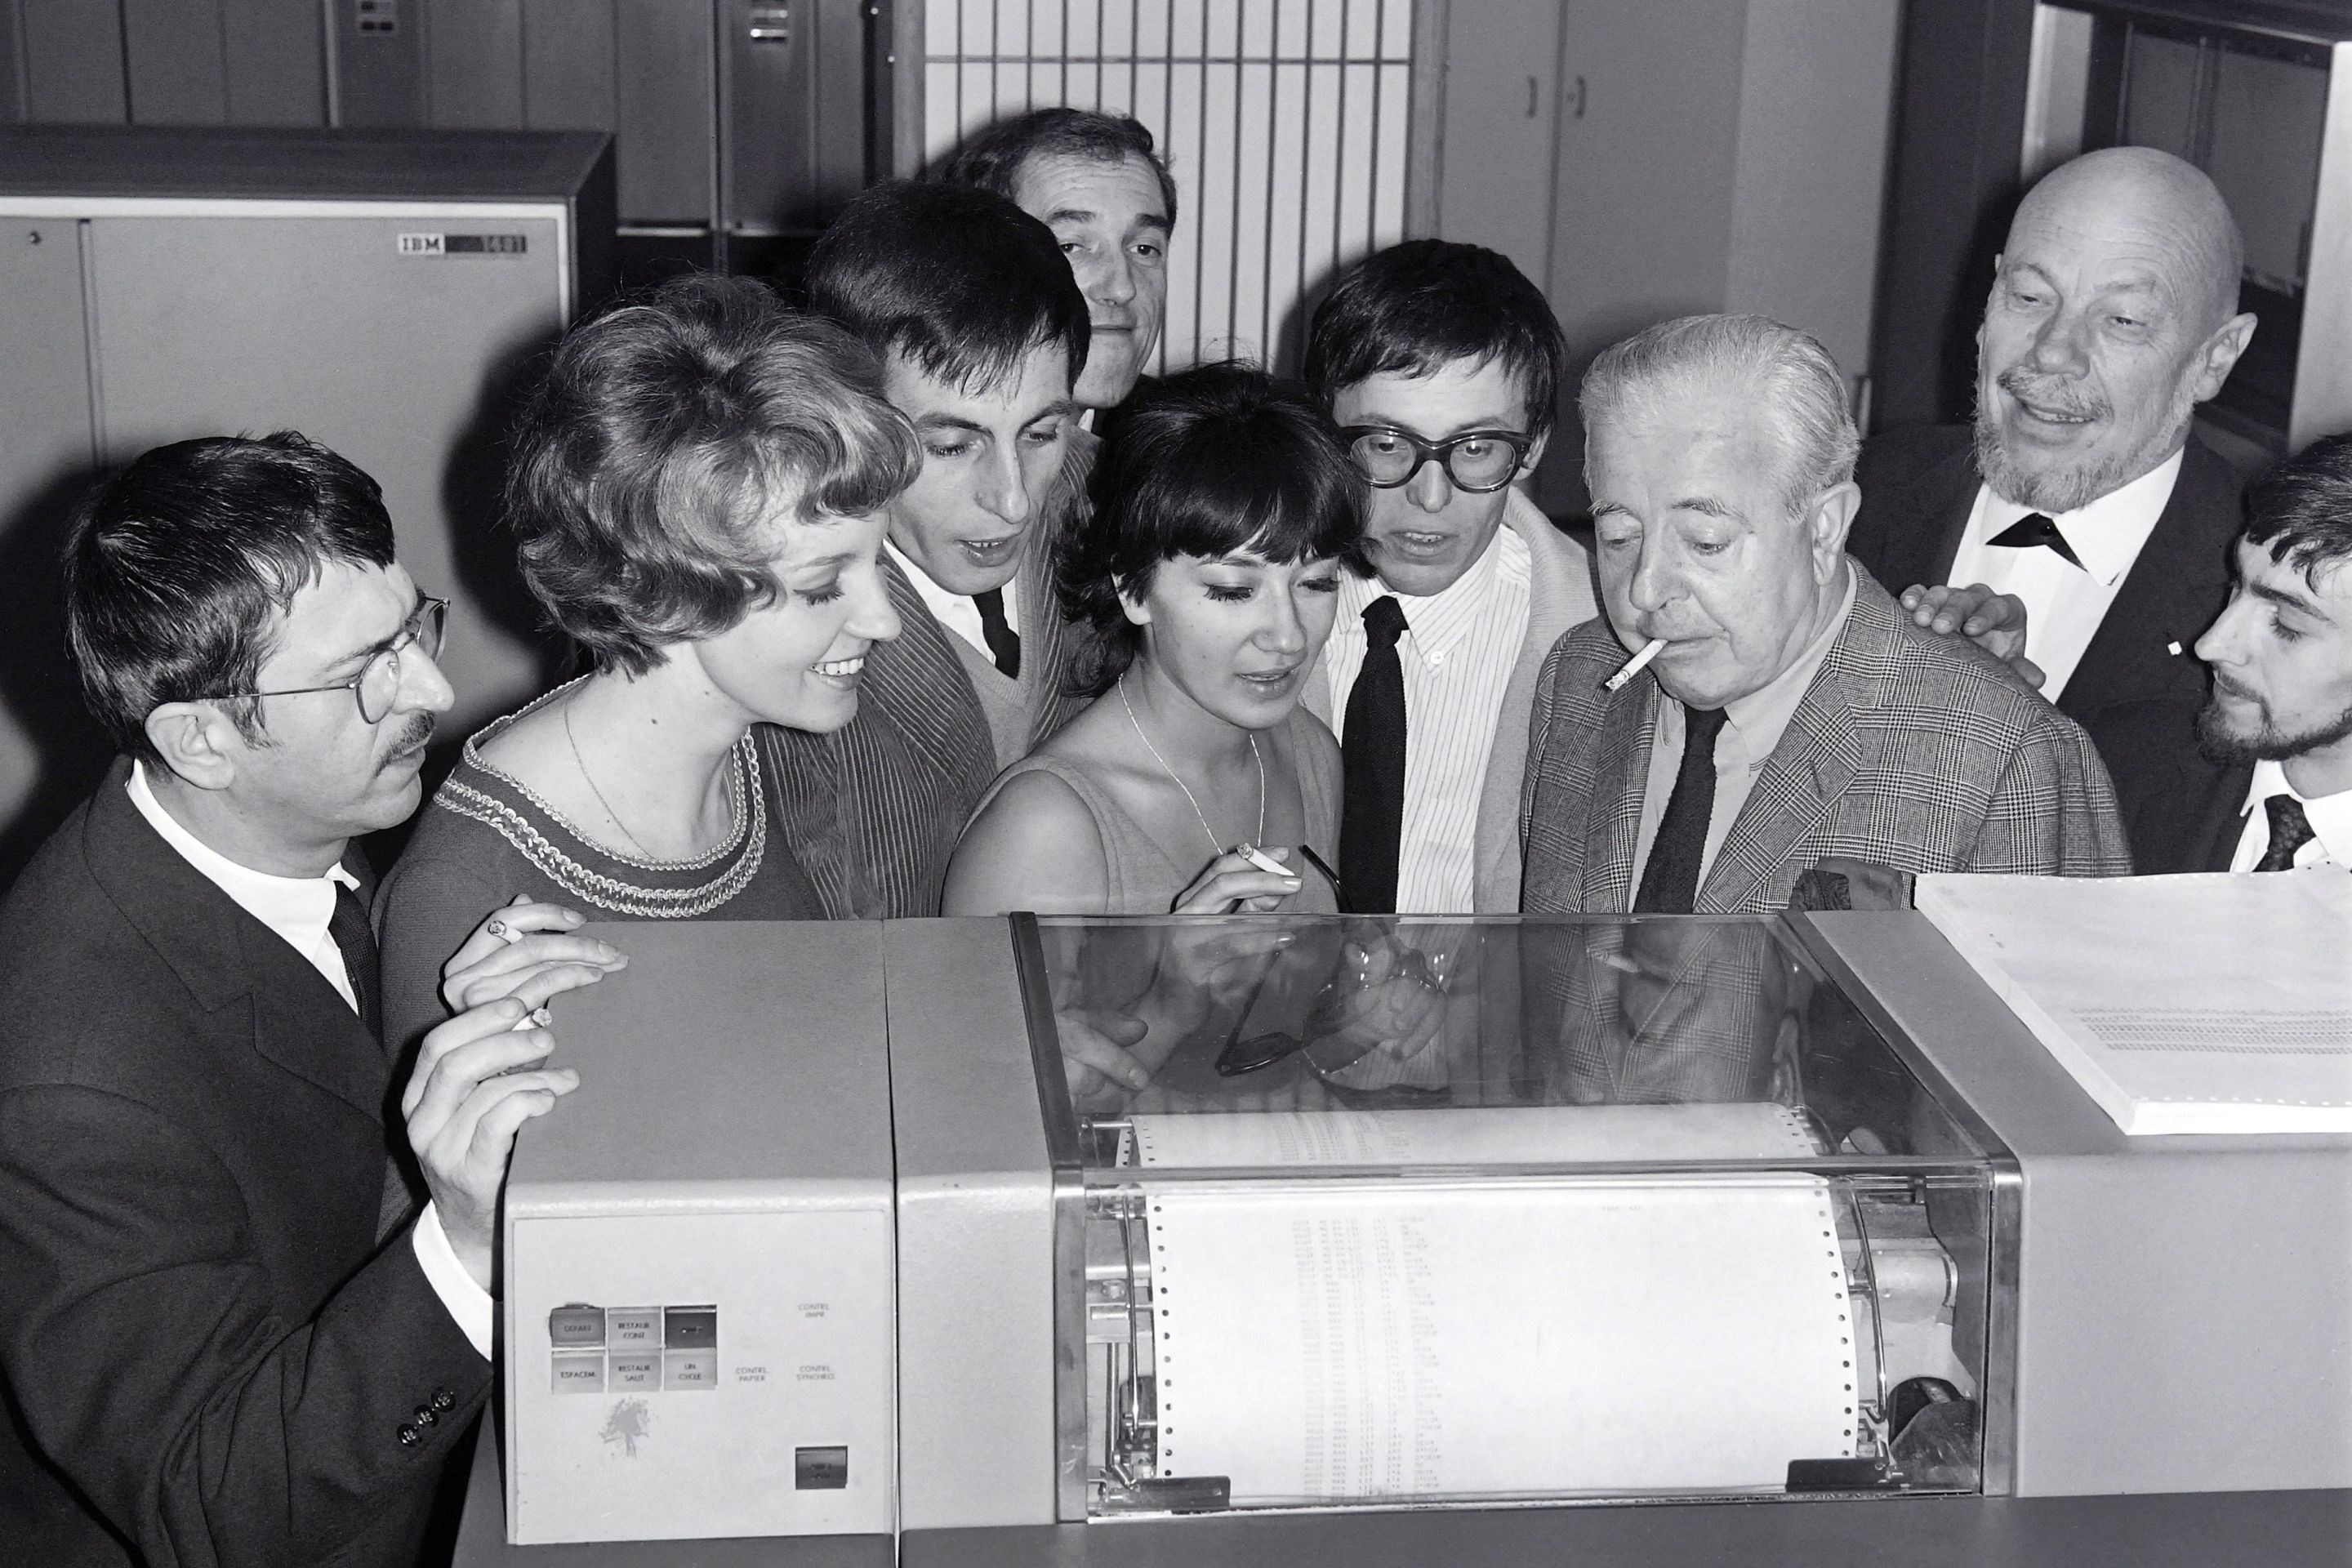 (From L to R) Roger Riffard, Lise Granvel, Armand Babel, Jean-Pierre Dutour, Catherine Sotha, Romain Bouteille, Leo Campion, Jacques Prevert and Jacques Barbier look at the IBM computer which will find the title of the new play written by Romain Bouteille (4thR with glasses), on November 13, 1965 in Paris. (Photo by - / AFP) (